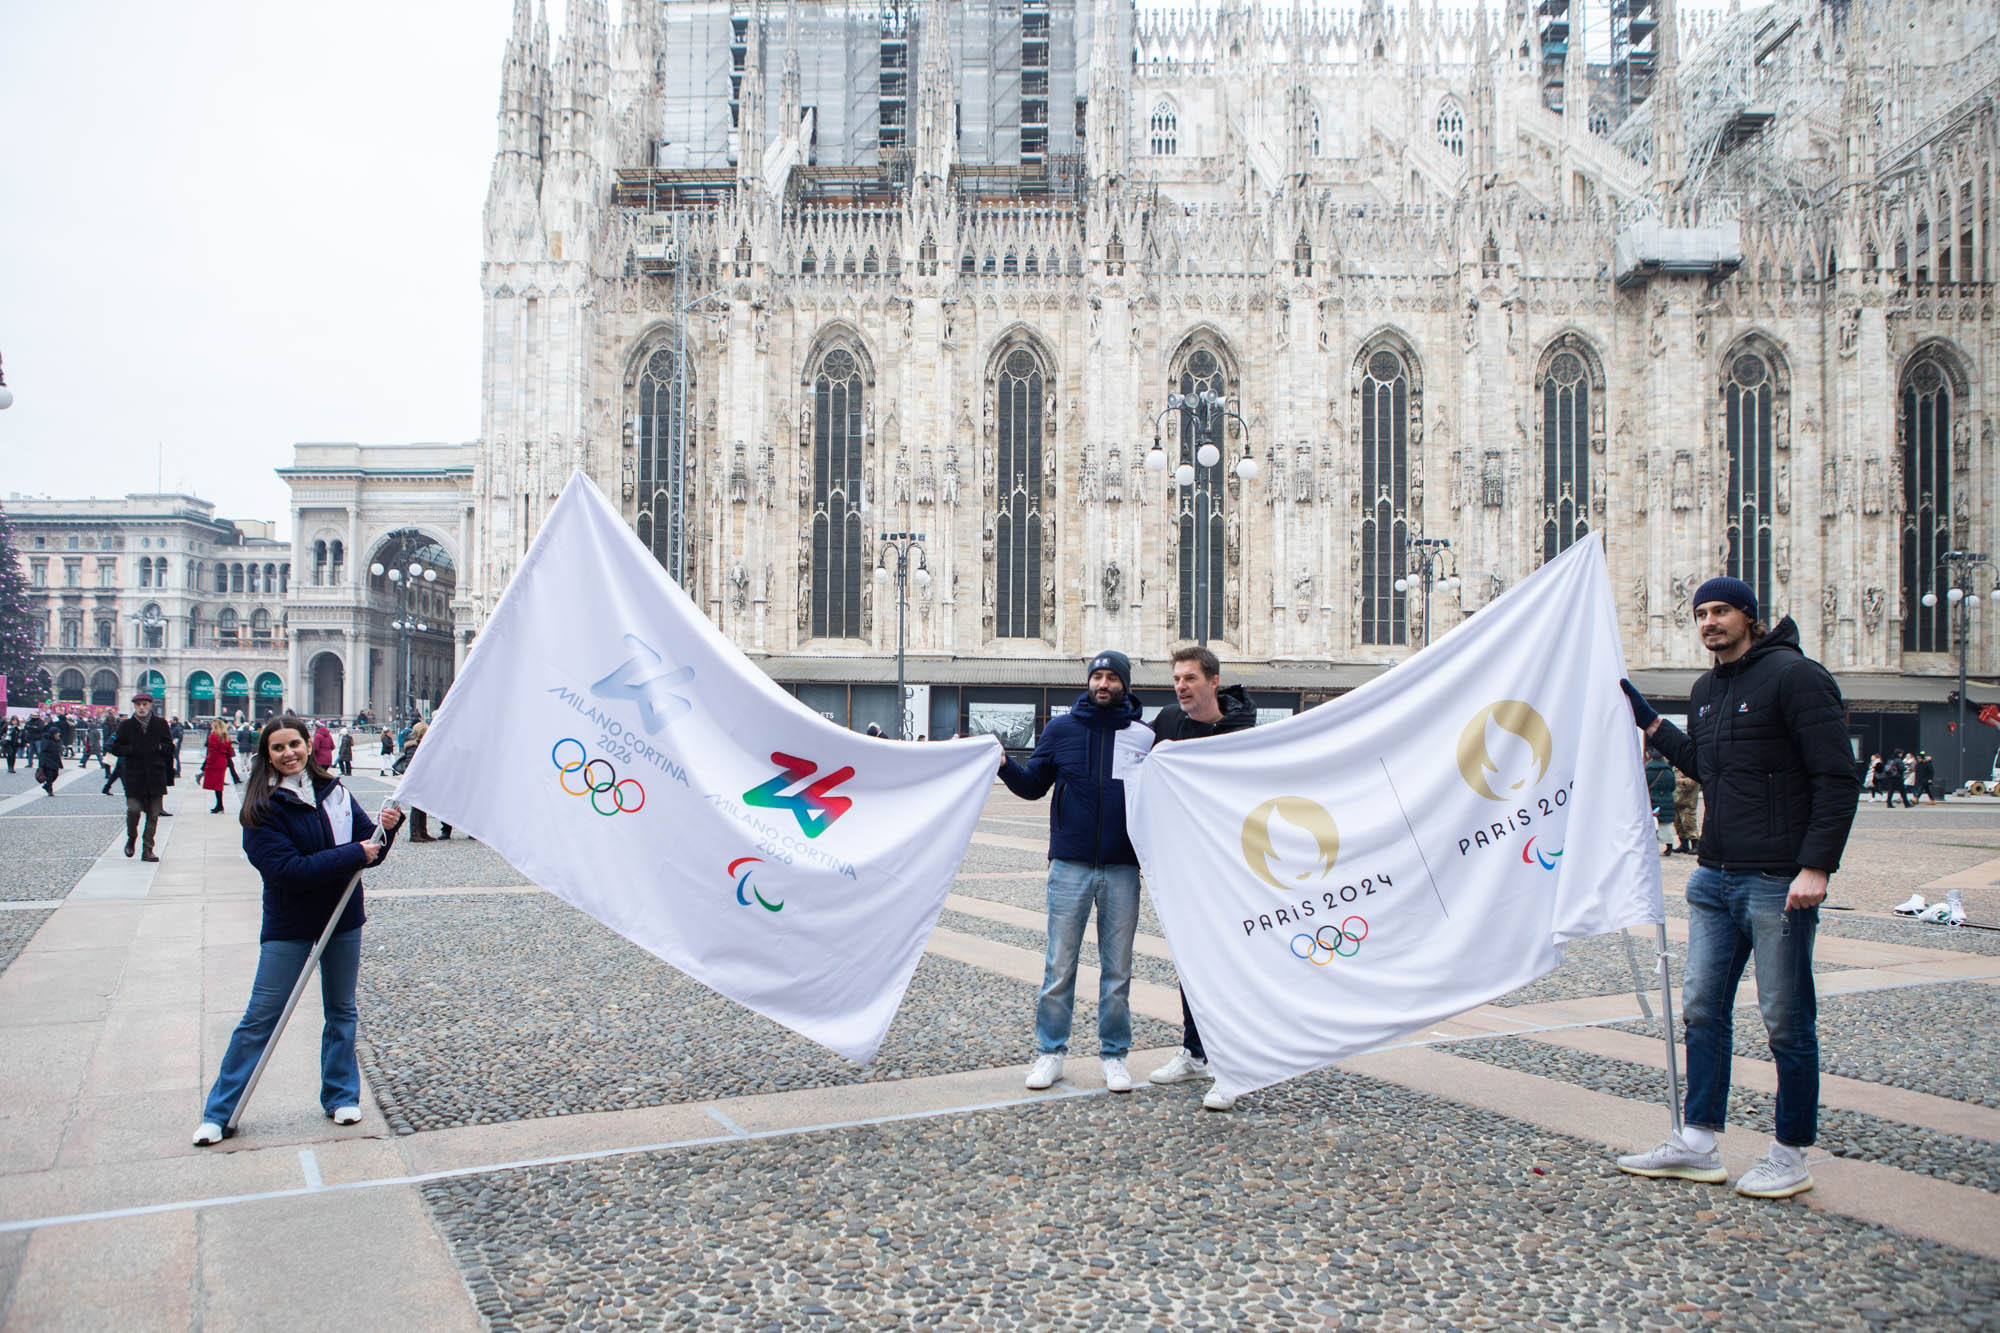 A colourful flag exchange event between Milan Cortina 2026 and Paris 2024 took place at the Palazzo Reale in Milan ©Milan Cortina 2026